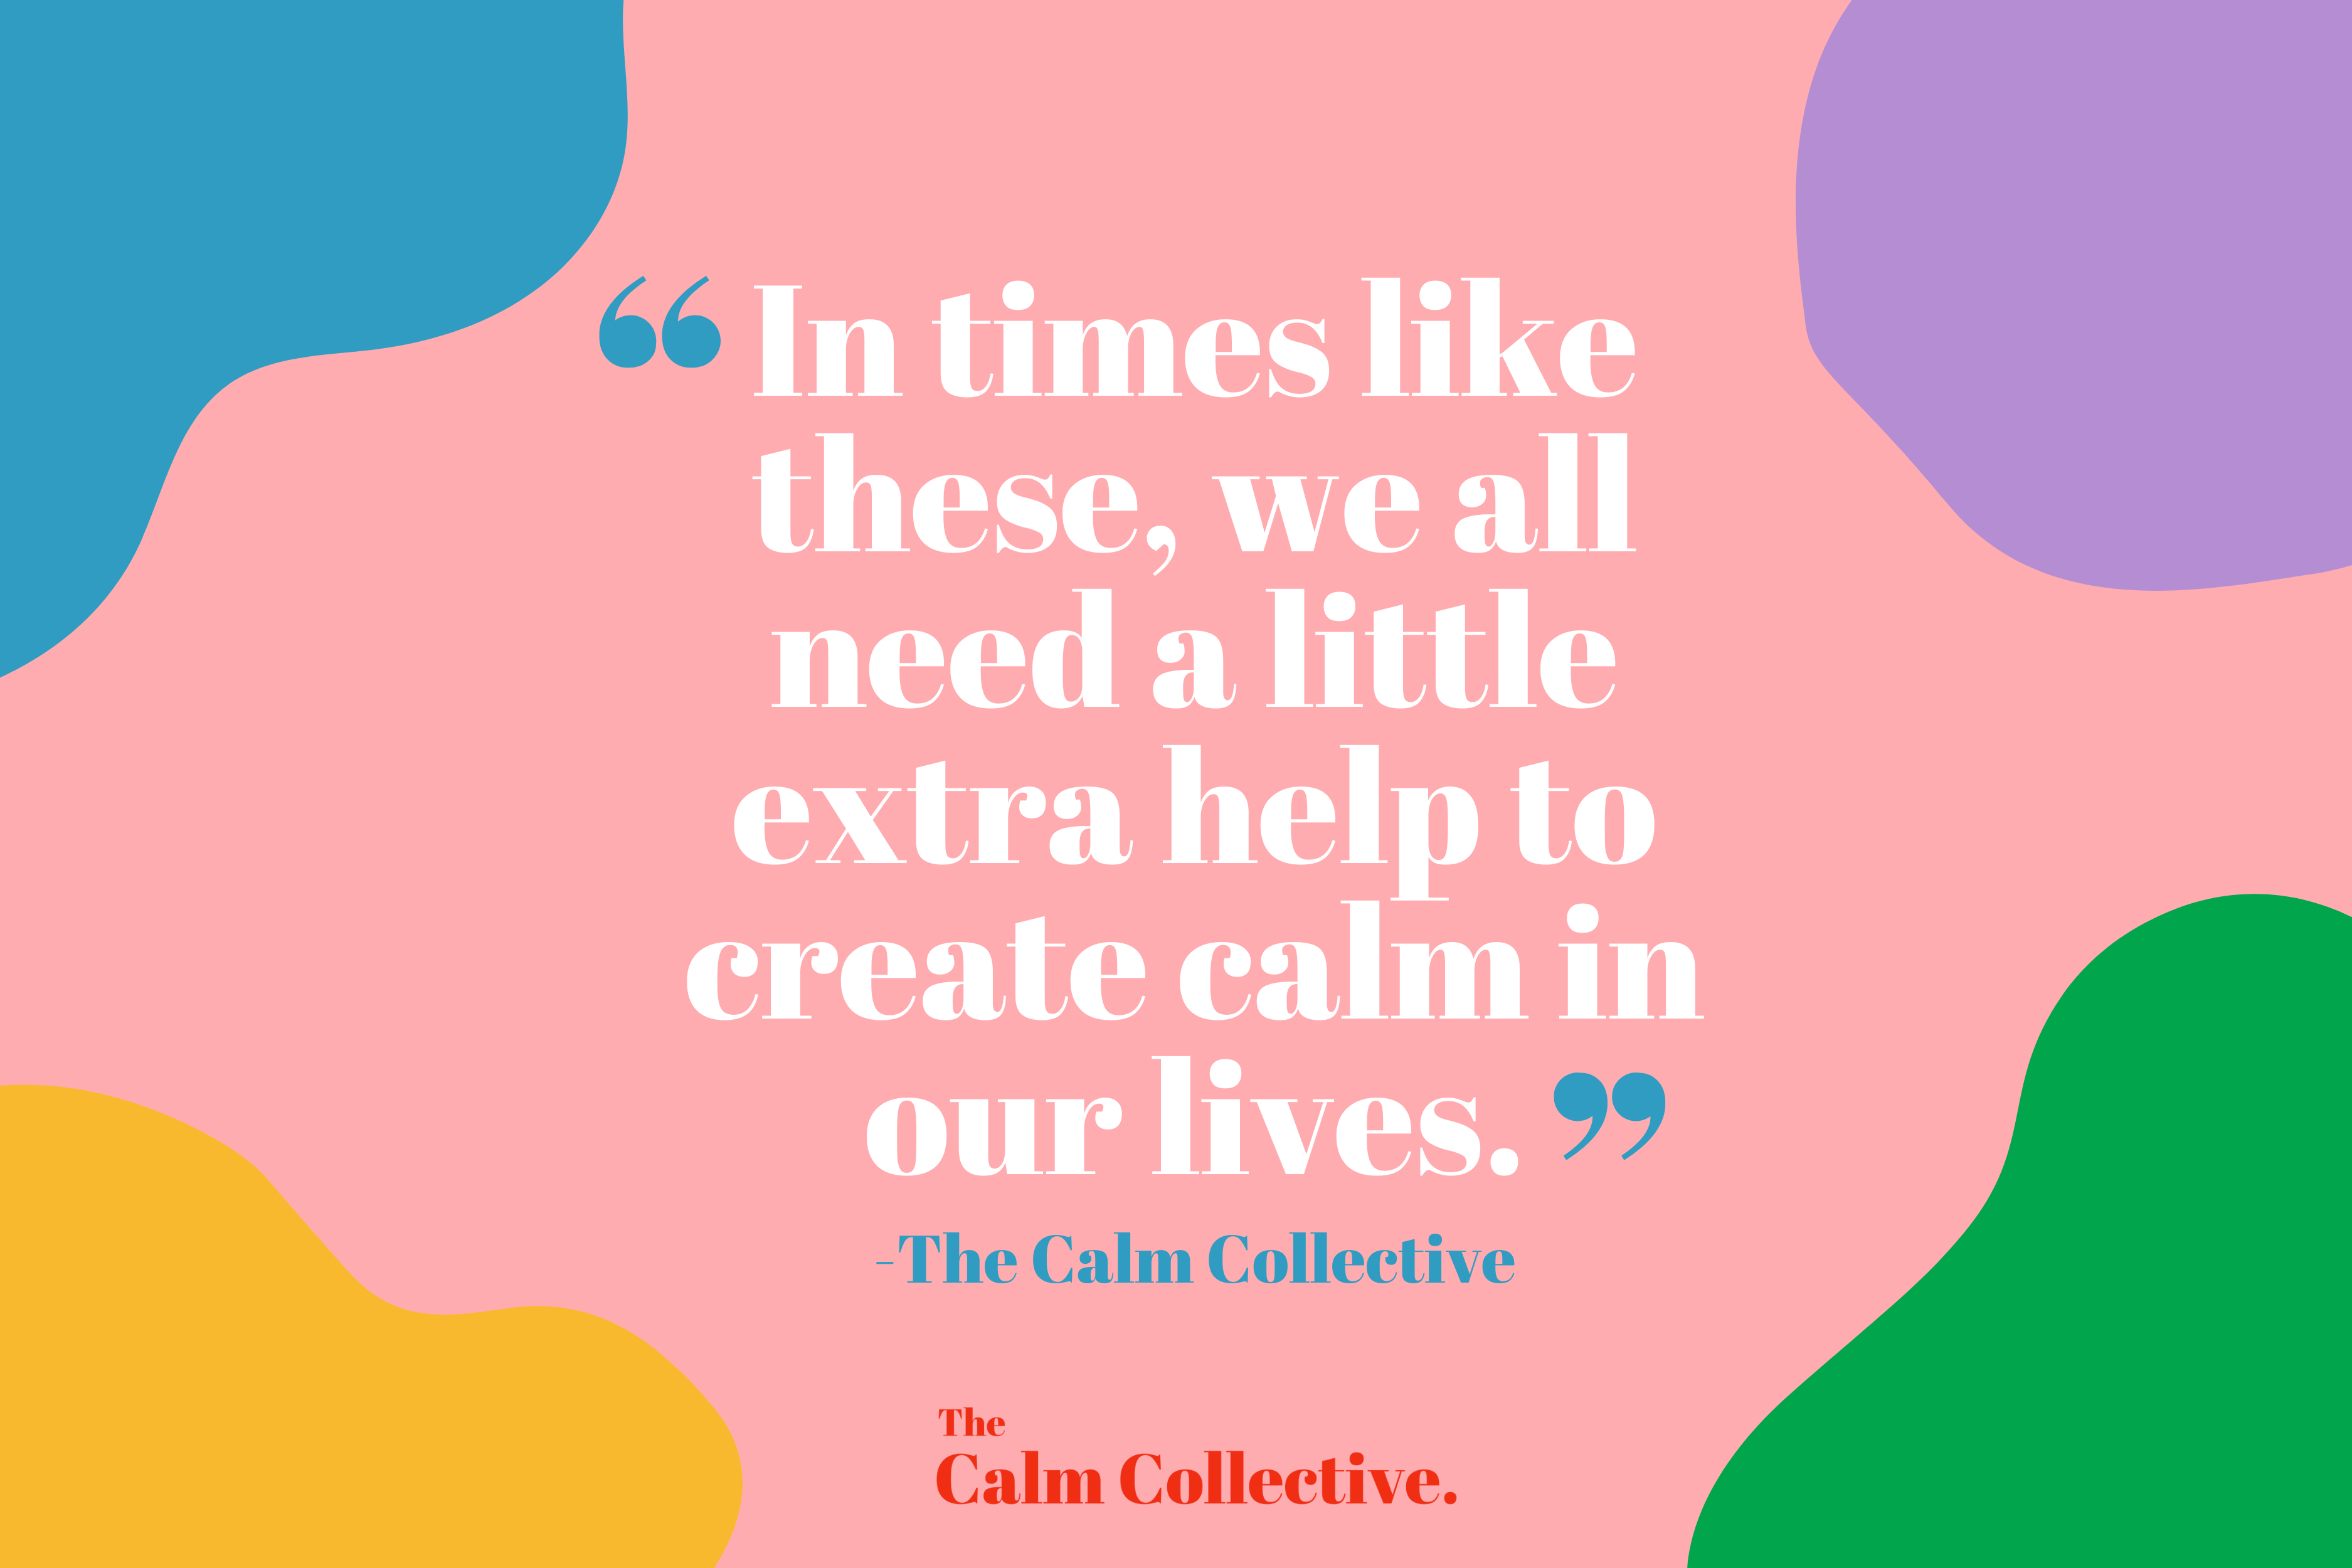 Introducing – The Calm Collective!